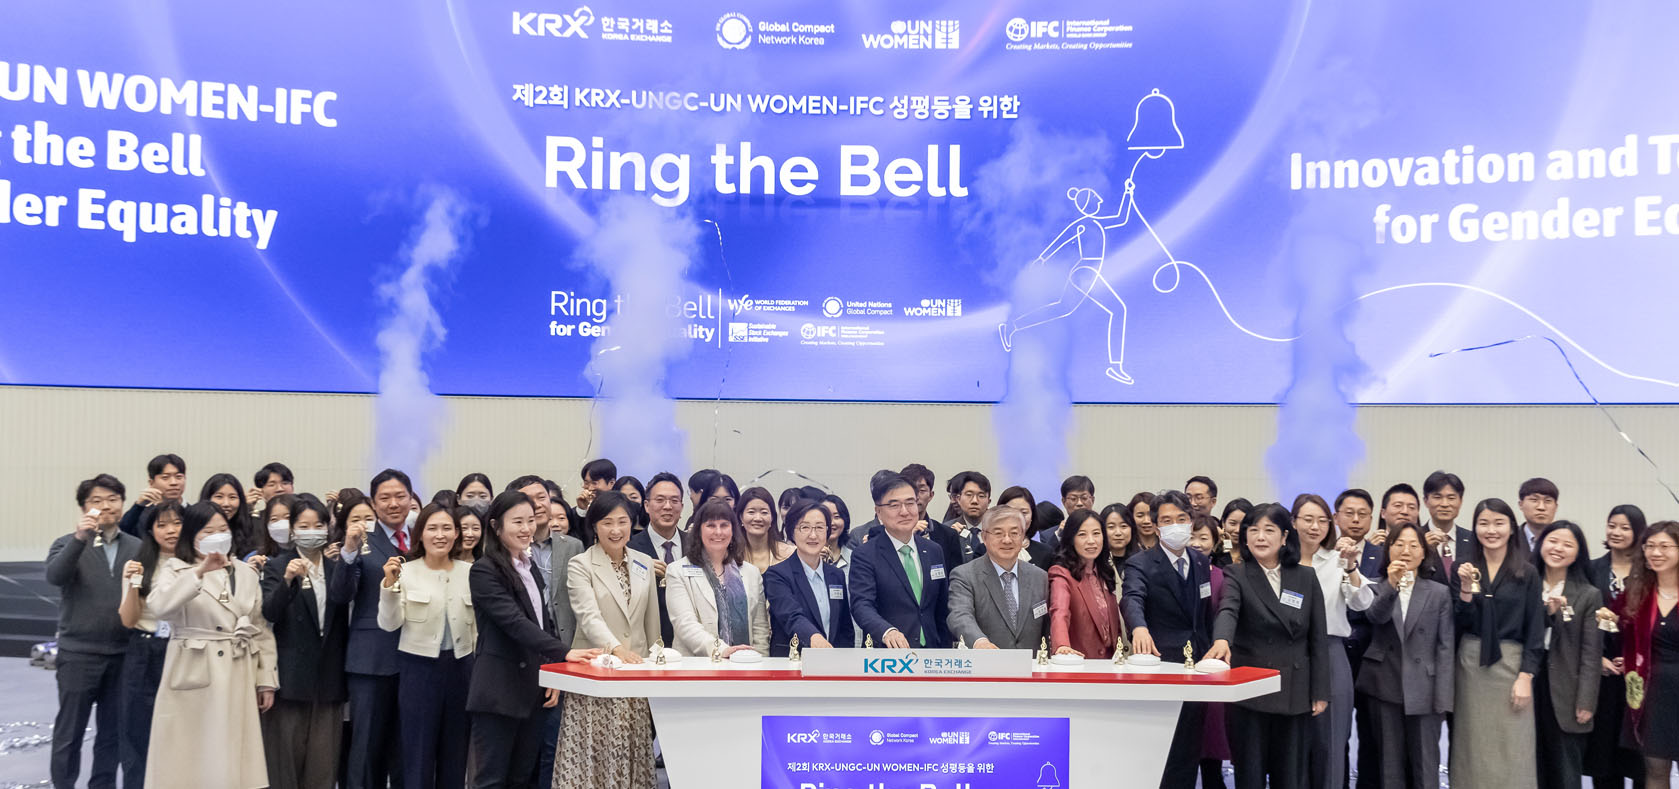 Tech sector in focus as the Republic of Korea joins “Ring the Bell” event for gender equality. Photo: UN Women/Jeong Jae Yeon